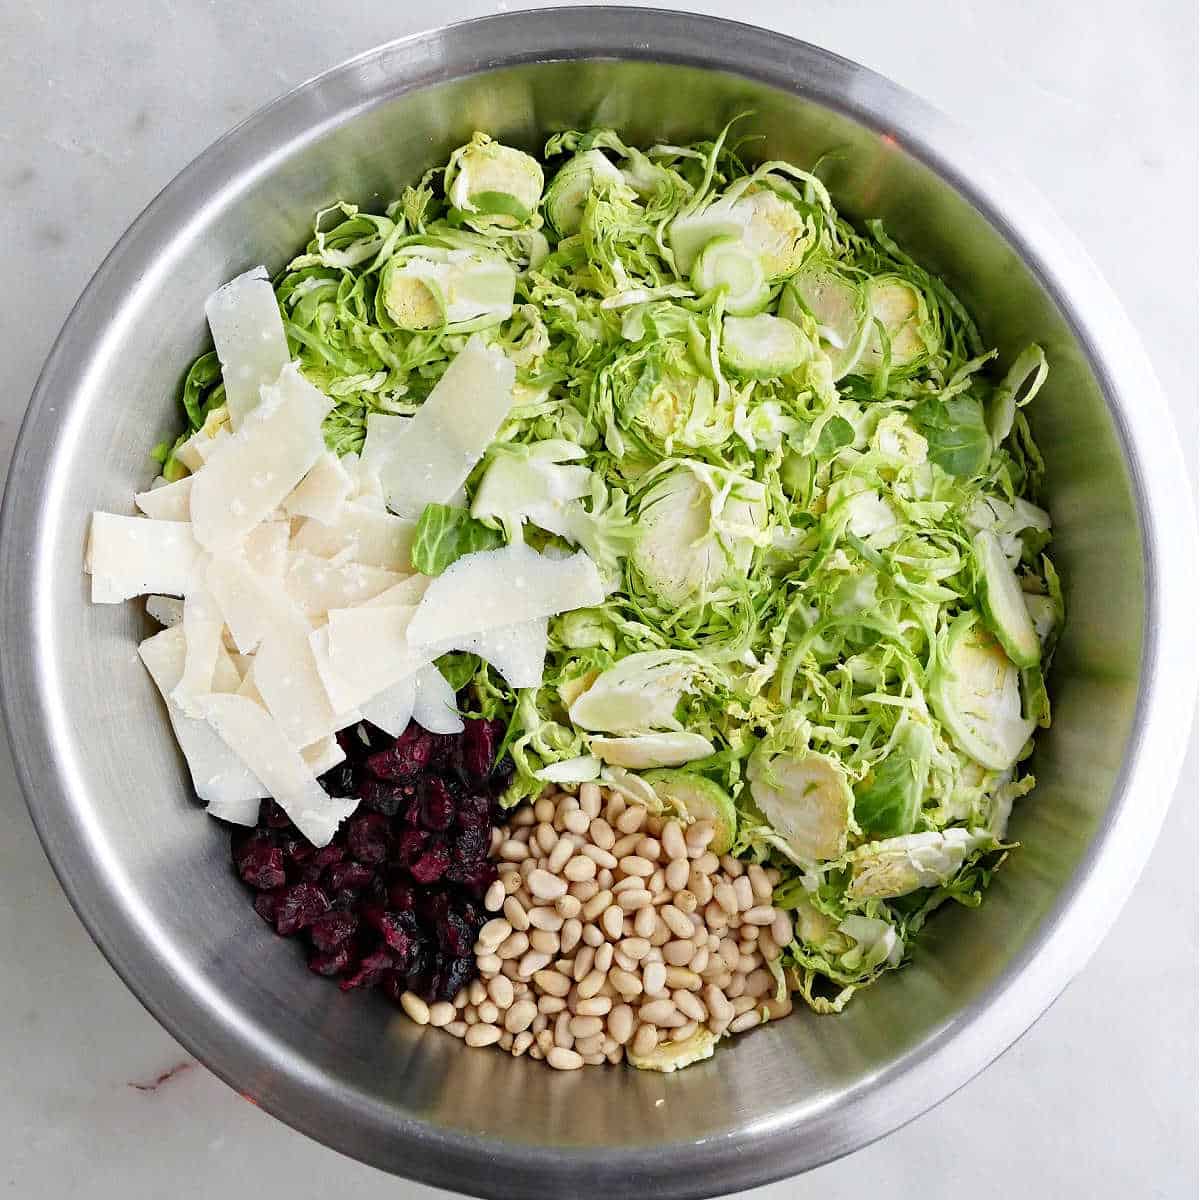 ingredients for Brussels sprouts salad in a large mixing bowl on a counter